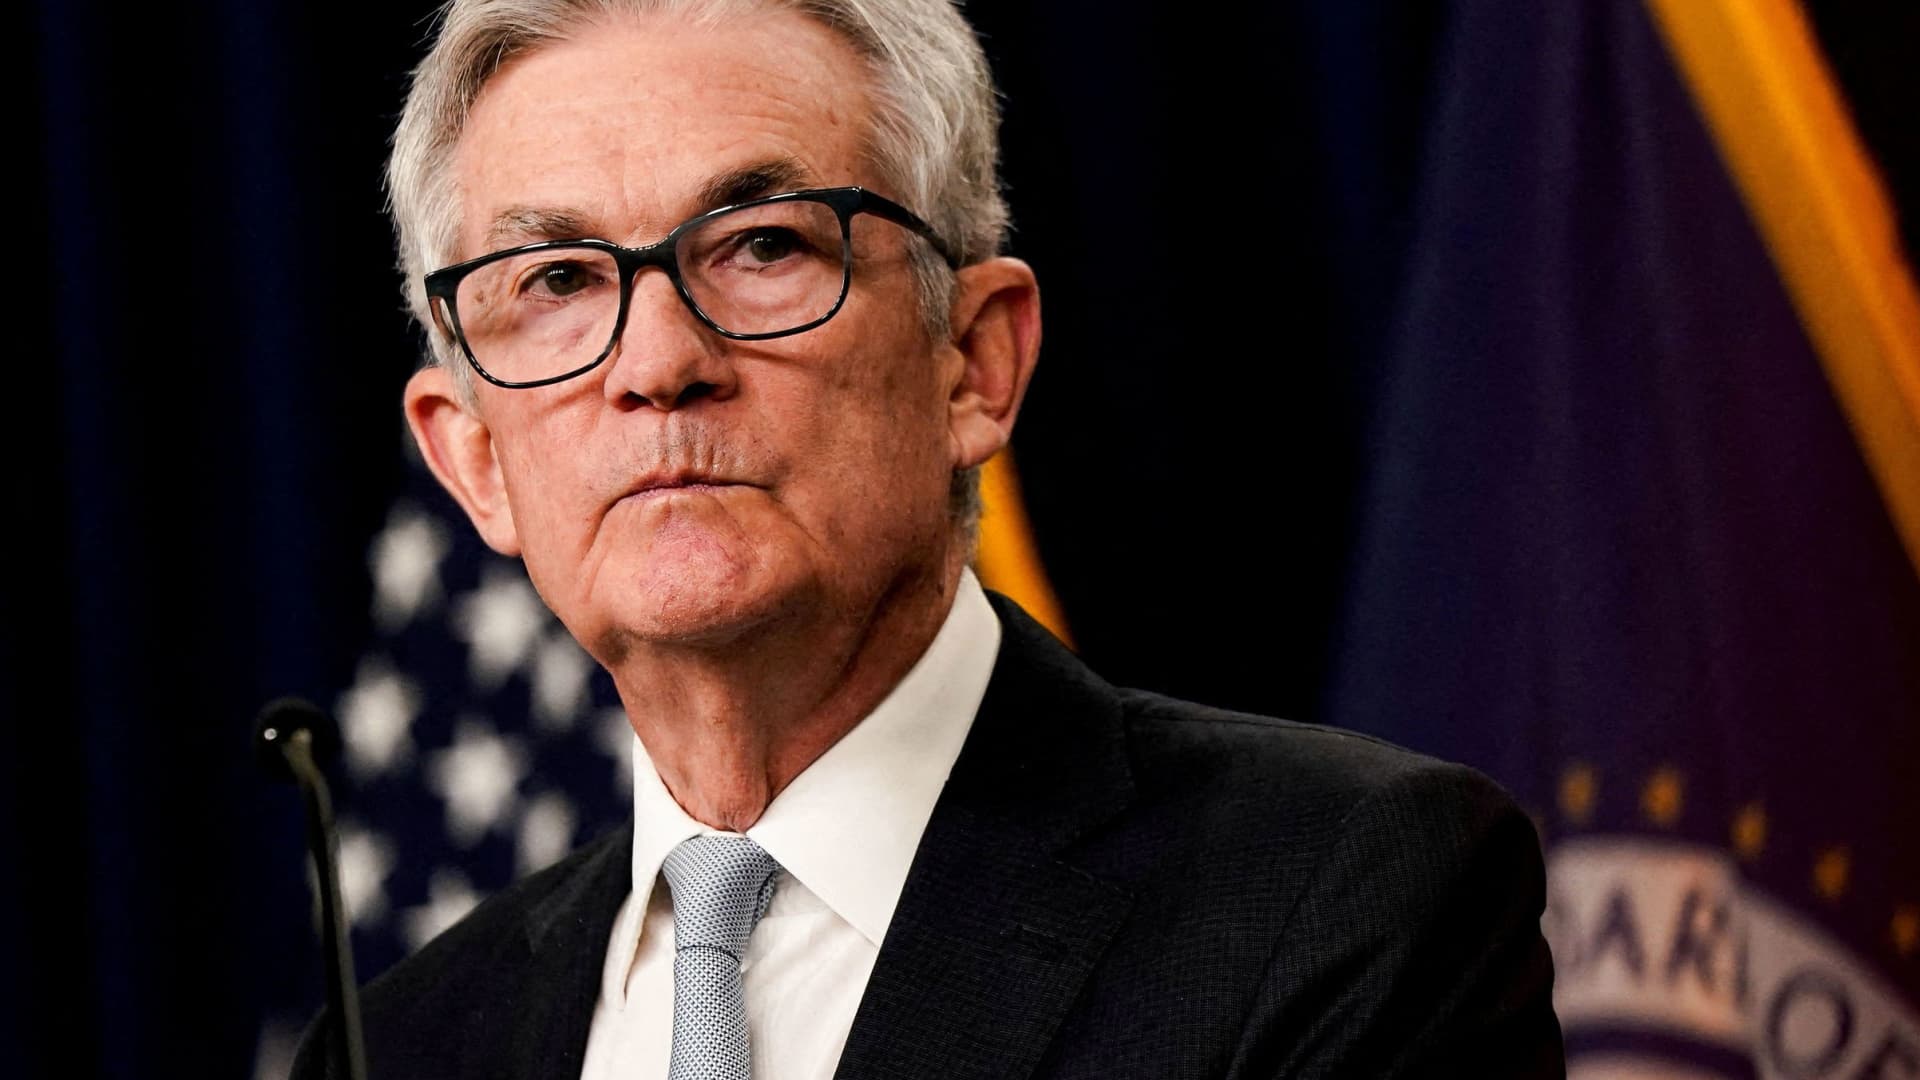 When will the Federal Reserve ease its rate hikes and inflation fight? Keep an e..